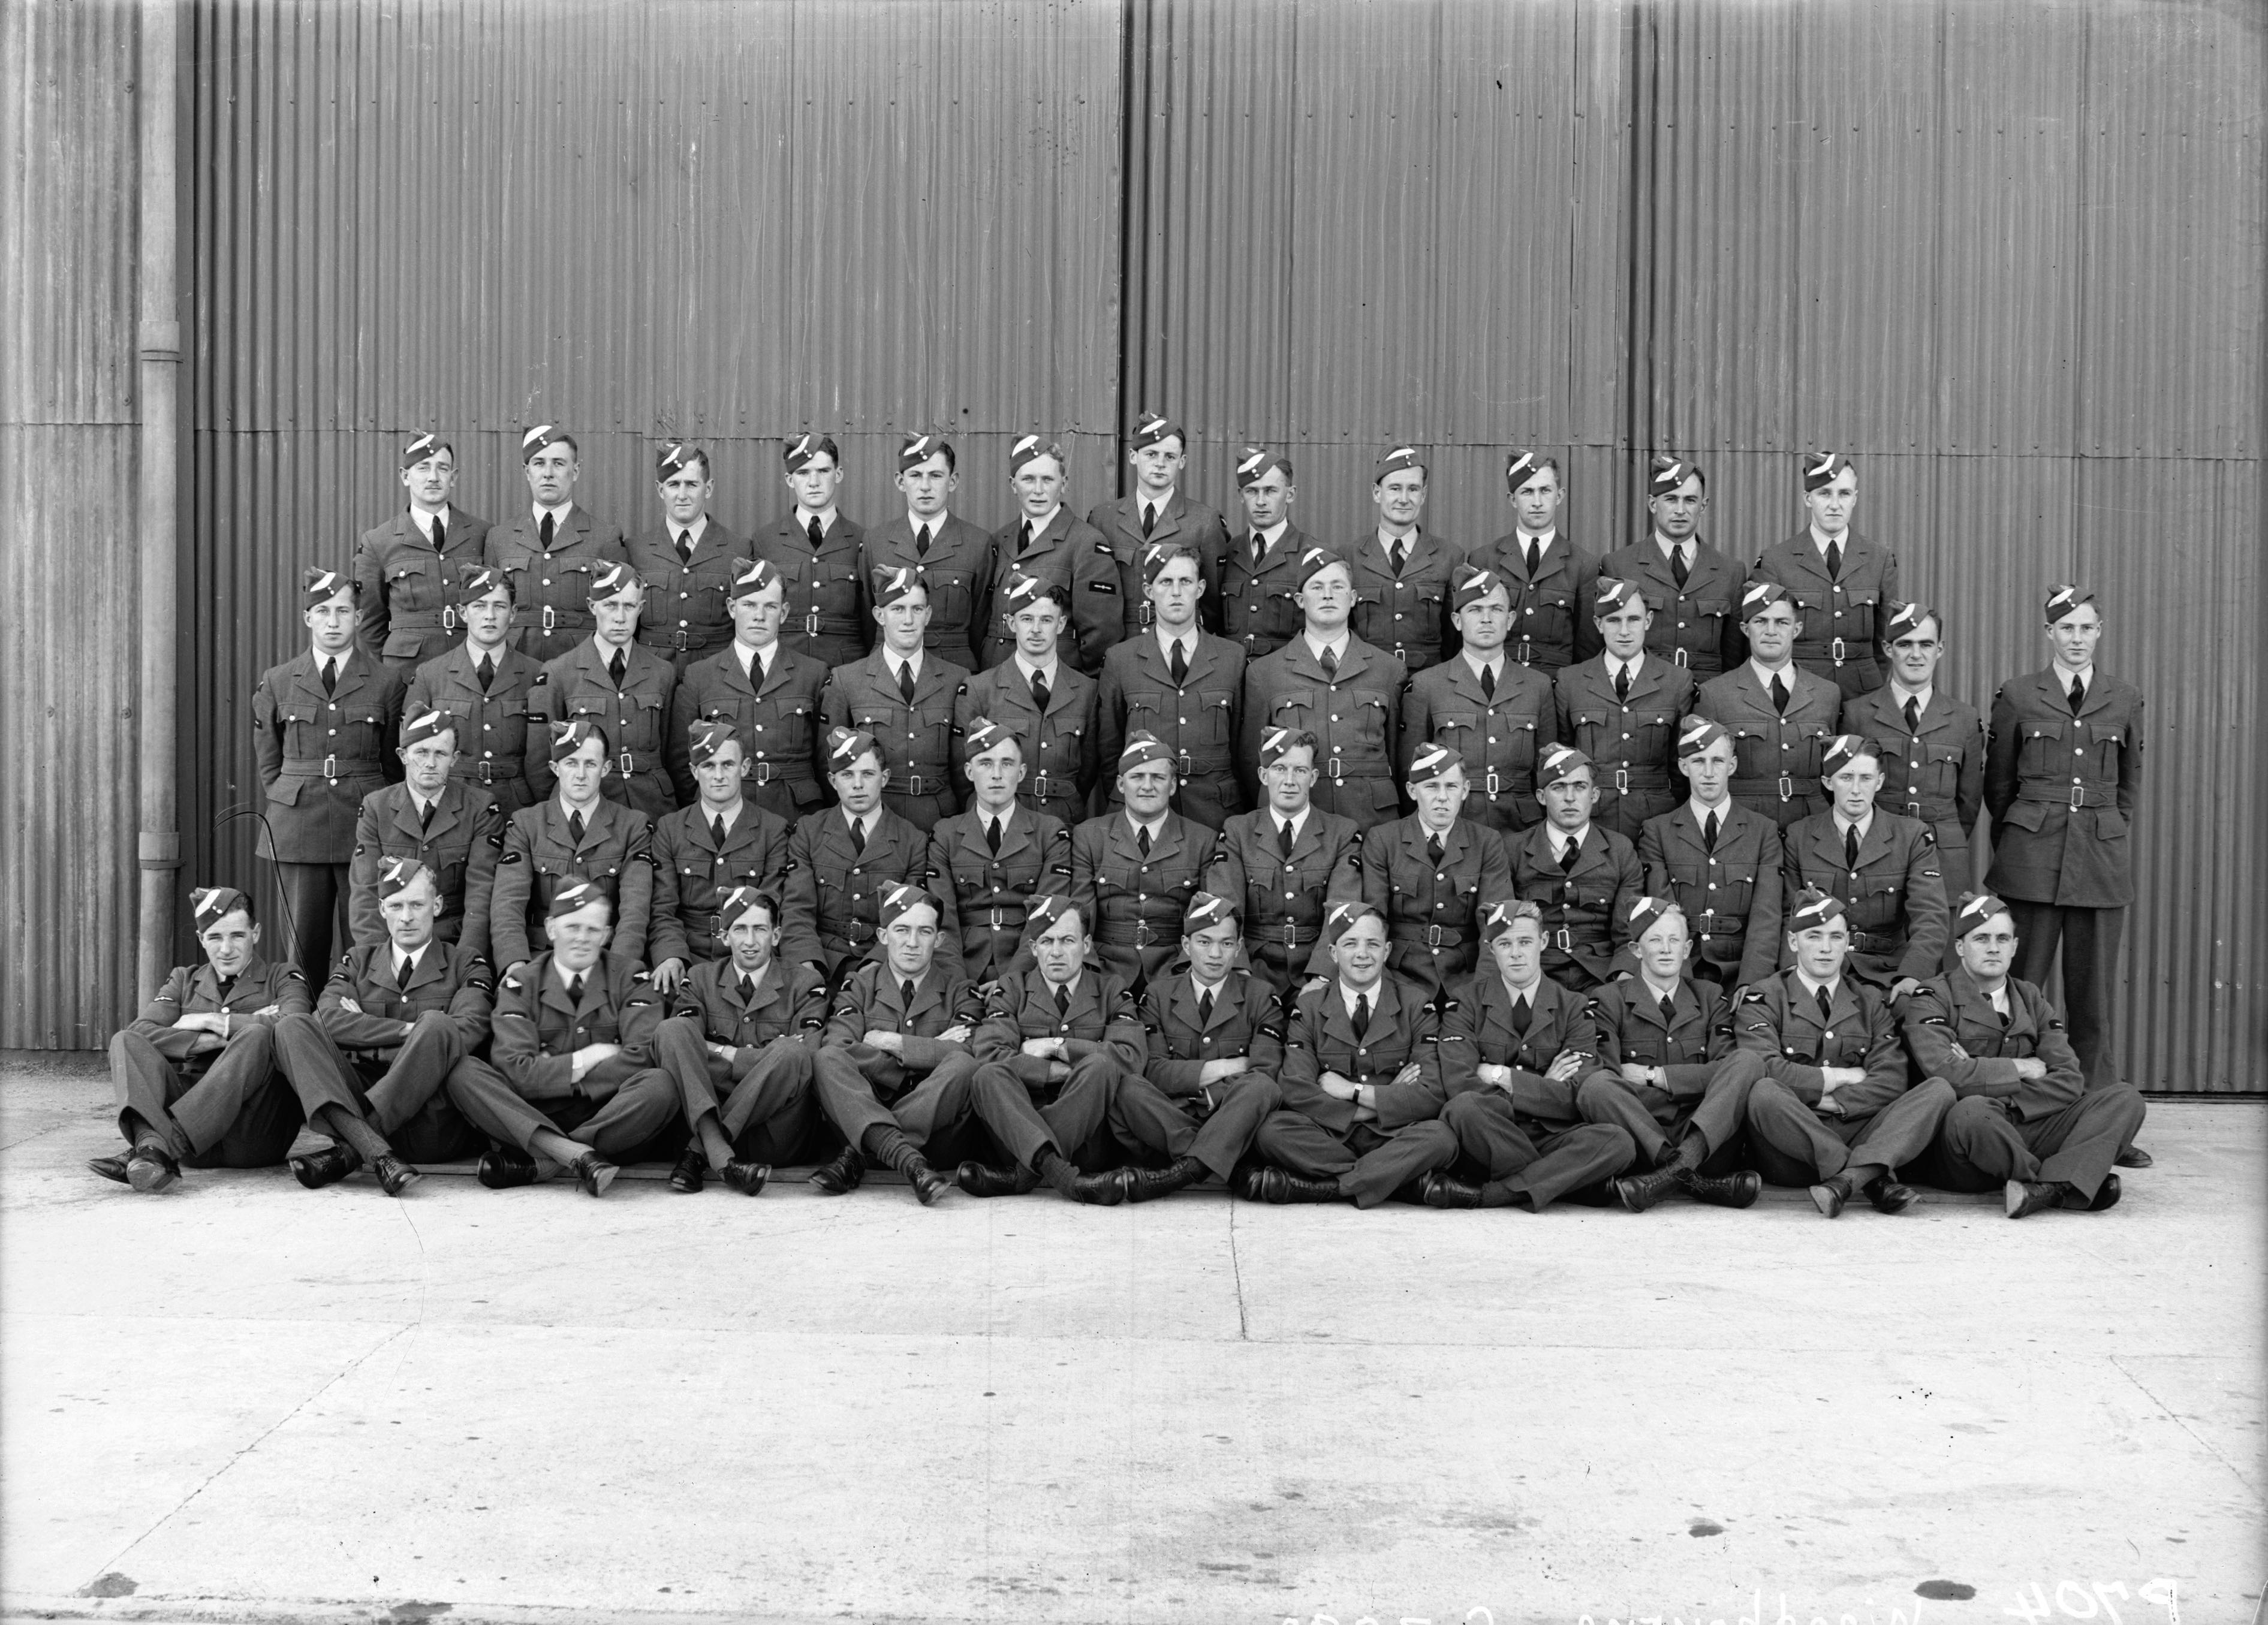 Tambour was transferred to 2 SFTS, RNZAF Station Woodbourne in March 1942, when 3 SFTS was disbanded. The photo shows Course No. 25B. In the back row are (left to right): Lumsden, Tanner, Parsons, Blue, McKay, Tambour, Foster, Stringer, Collins, Anderson, Rimmer, McCabe; in the third row: Gray, Sutherland, Keller, Tennant, Howie, Cole, East, Broun, Regan, Alexander, Elliot, Graham, Towgood; in the second row: Donnelly, Bunt, Abbot, Bills, Mooney, Hambrook, Pearson, Swan, Rutherford, McDougall, Craig; and in the front row: Rendall, Webb, Williams, P Smith, Reid, Meagher, Lee, McDonald, Arkinstall, D Smith, Casey, Robins (Air Force Museum of New Zealand Photograph Collection).